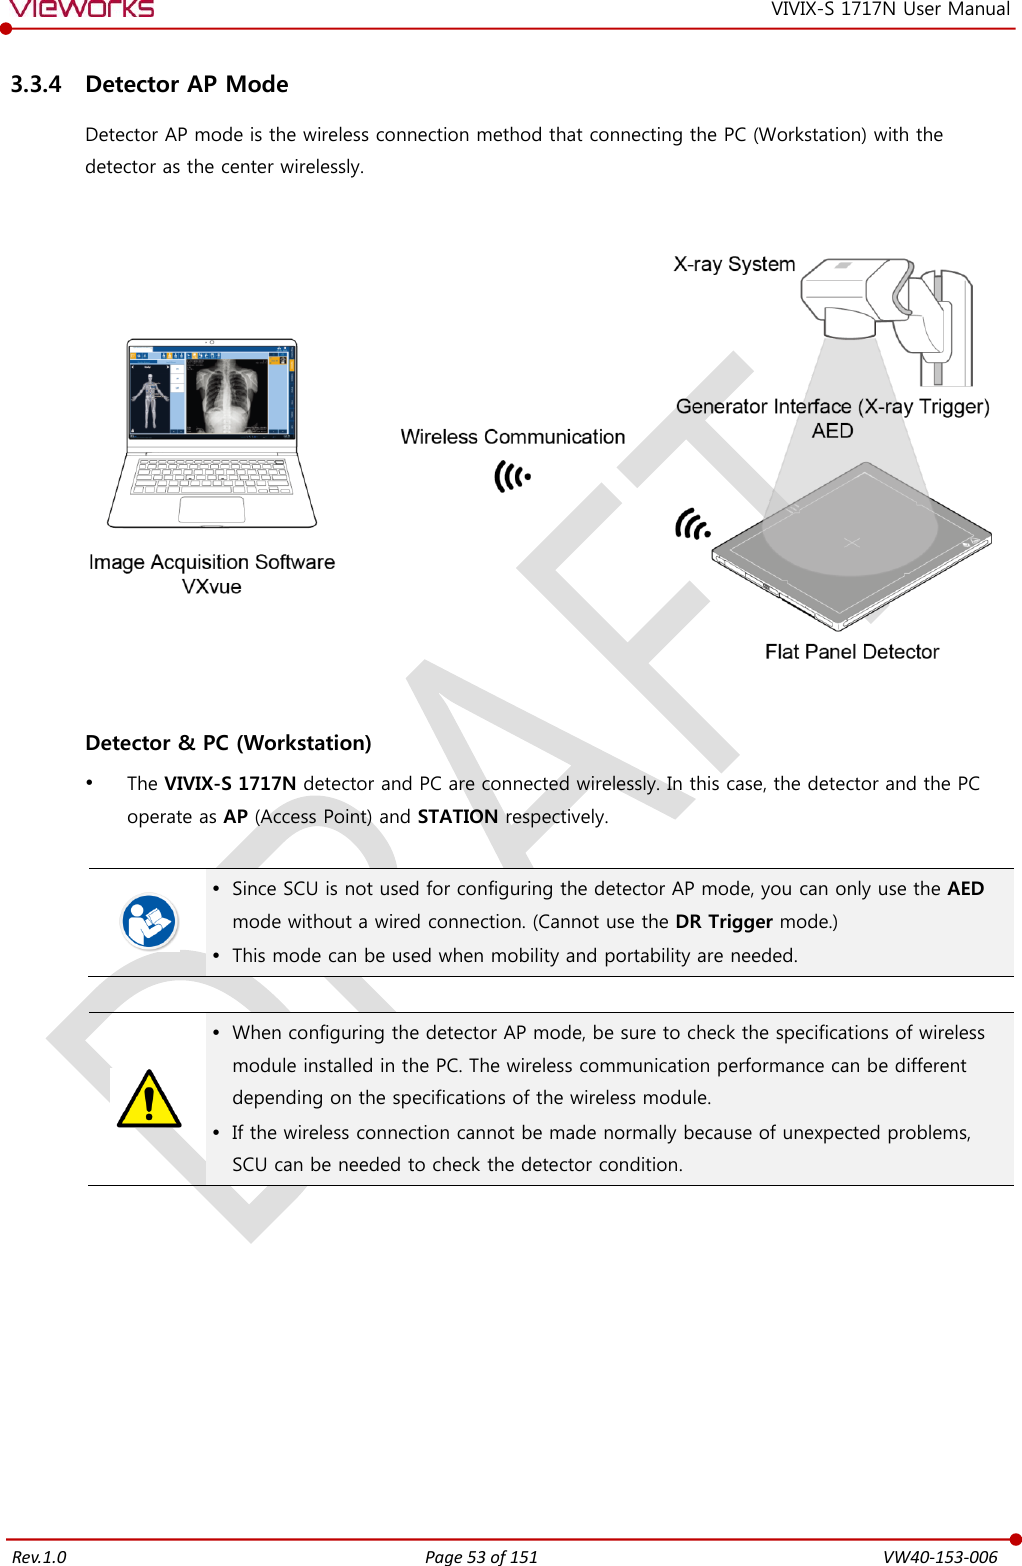   Rev.1.0 Page 53 of 151  VW40-153-006 VIVIX-S 1717N User Manual 3.3.4 Detector AP Mode Detector AP mode is the wireless connection method that connecting the PC (Workstation) with the detector as the center wirelessly.      Detector &amp; PC (Workstation)  The VIVIX-S 1717N detector and PC are connected wirelessly. In this case, the detector and the PC operate as AP (Access Point) and STATION respectively.    Since SCU is not used for configuring the detector AP mode, you can only use the AED mode without a wired connection. (Cannot use the DR Trigger mode.)  This mode can be used when mobility and portability are needed.    When configuring the detector AP mode, be sure to check the specifications of wireless module installed in the PC. The wireless communication performance can be different depending on the specifications of the wireless module.  If the wireless connection cannot be made normally because of unexpected problems, SCU can be needed to check the detector condition.           